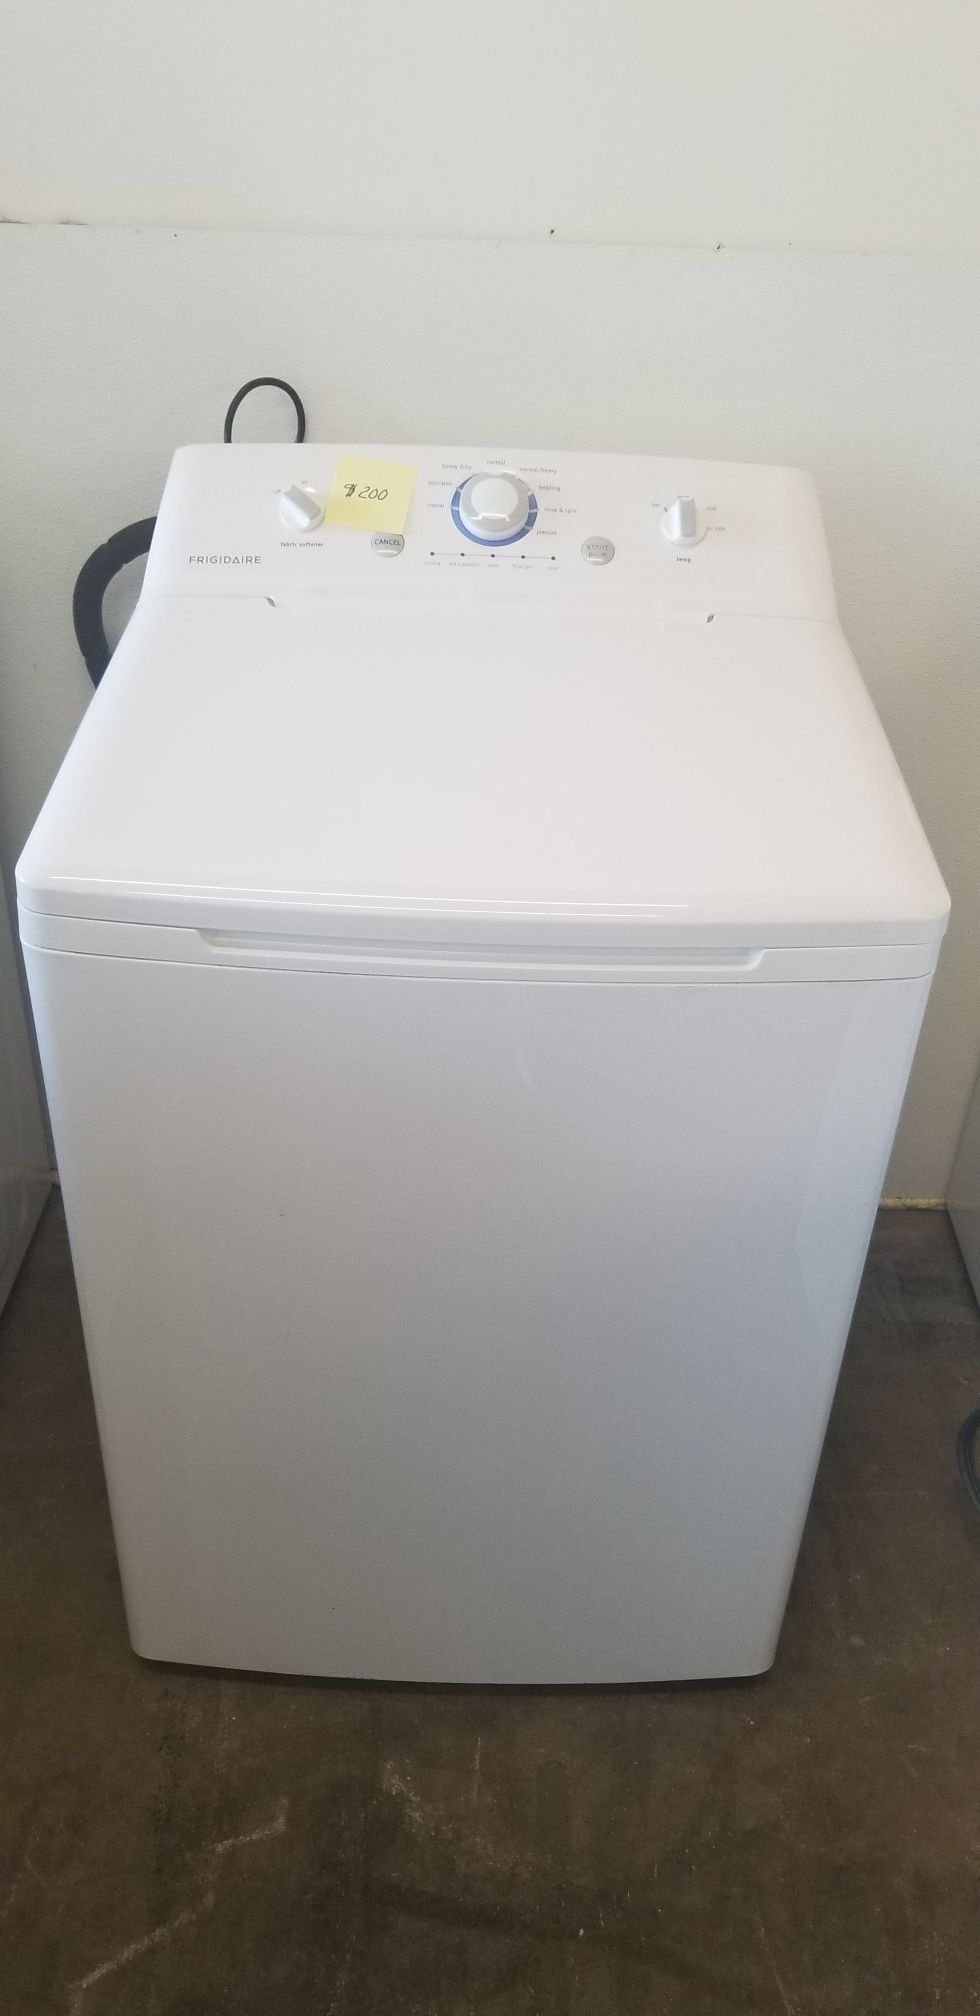 FRIGIDAIRE WASHER ALSO DELIVERY IS AVAILABLE